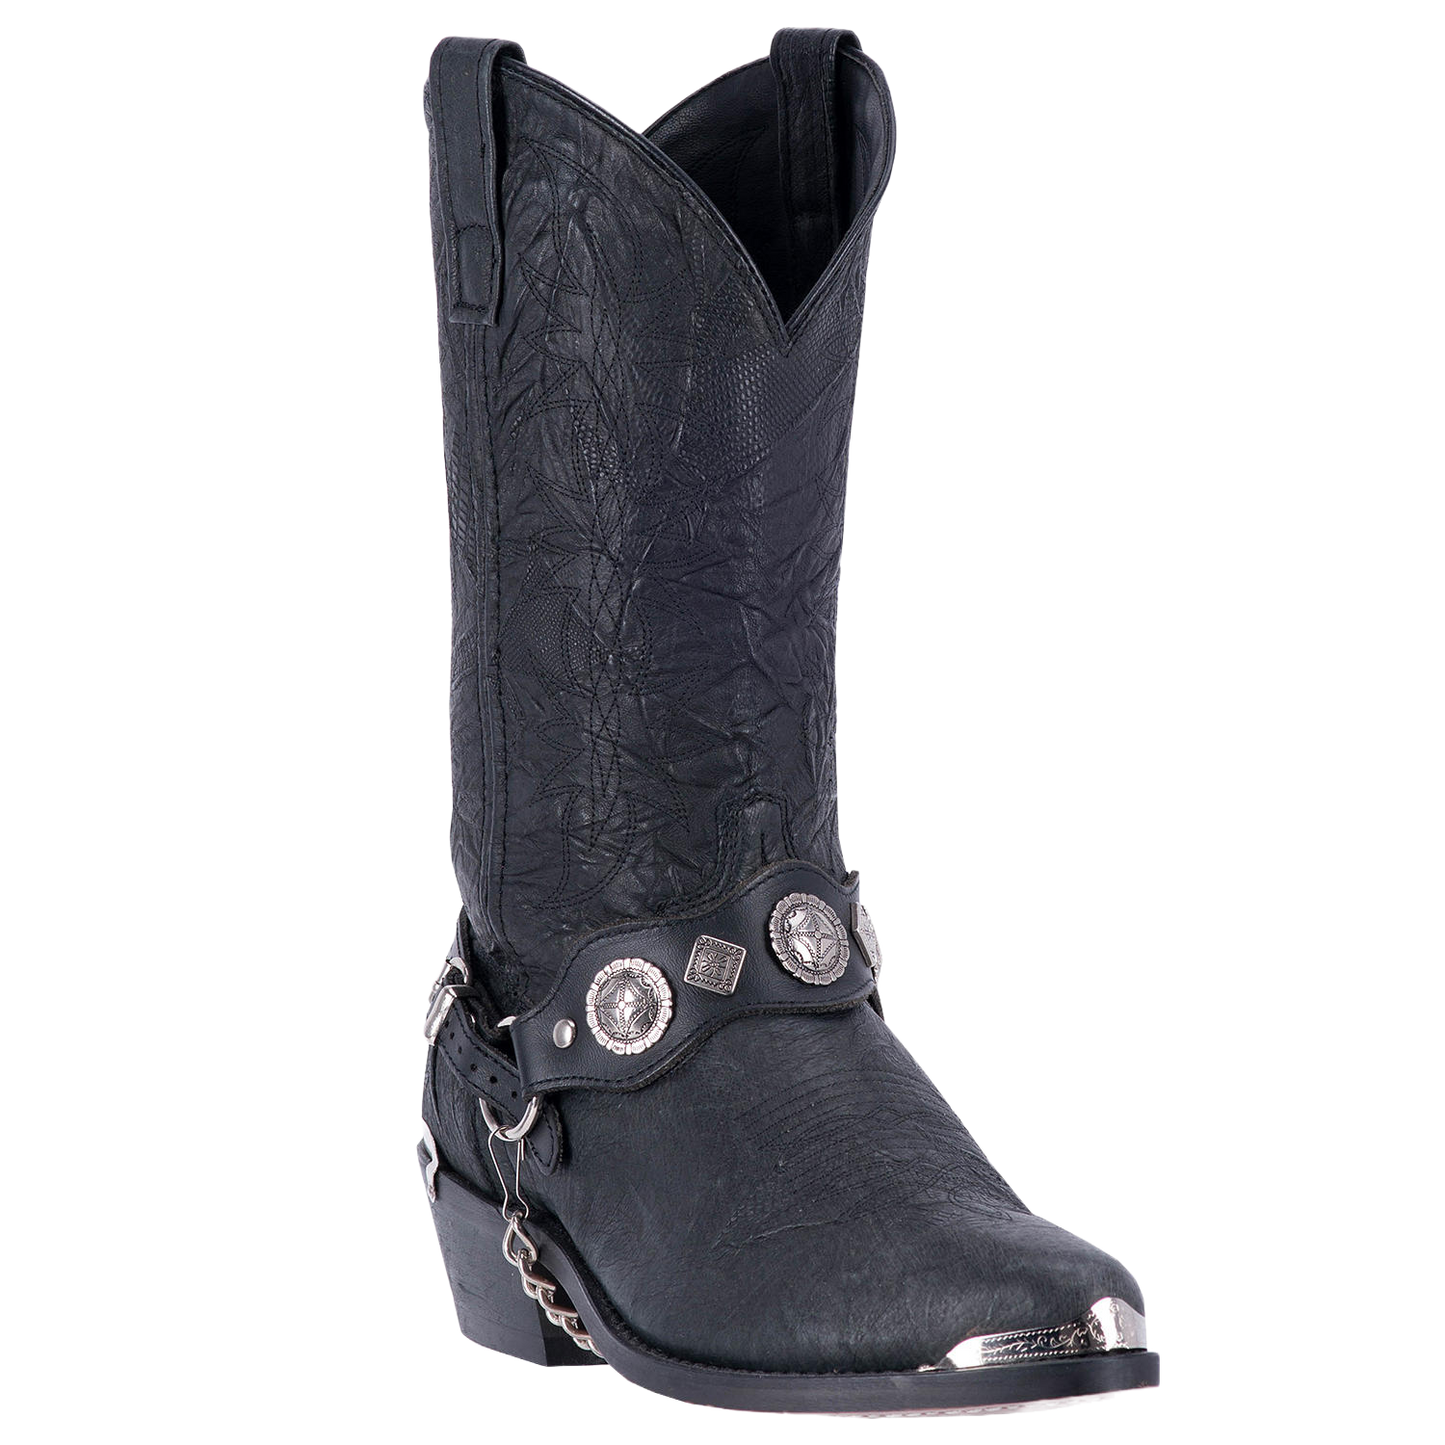 https://www.wildwestbootstore.com/cdn/shop/files/Myproject-2023-05-16T082123.502_1445x.png?v=1684239712